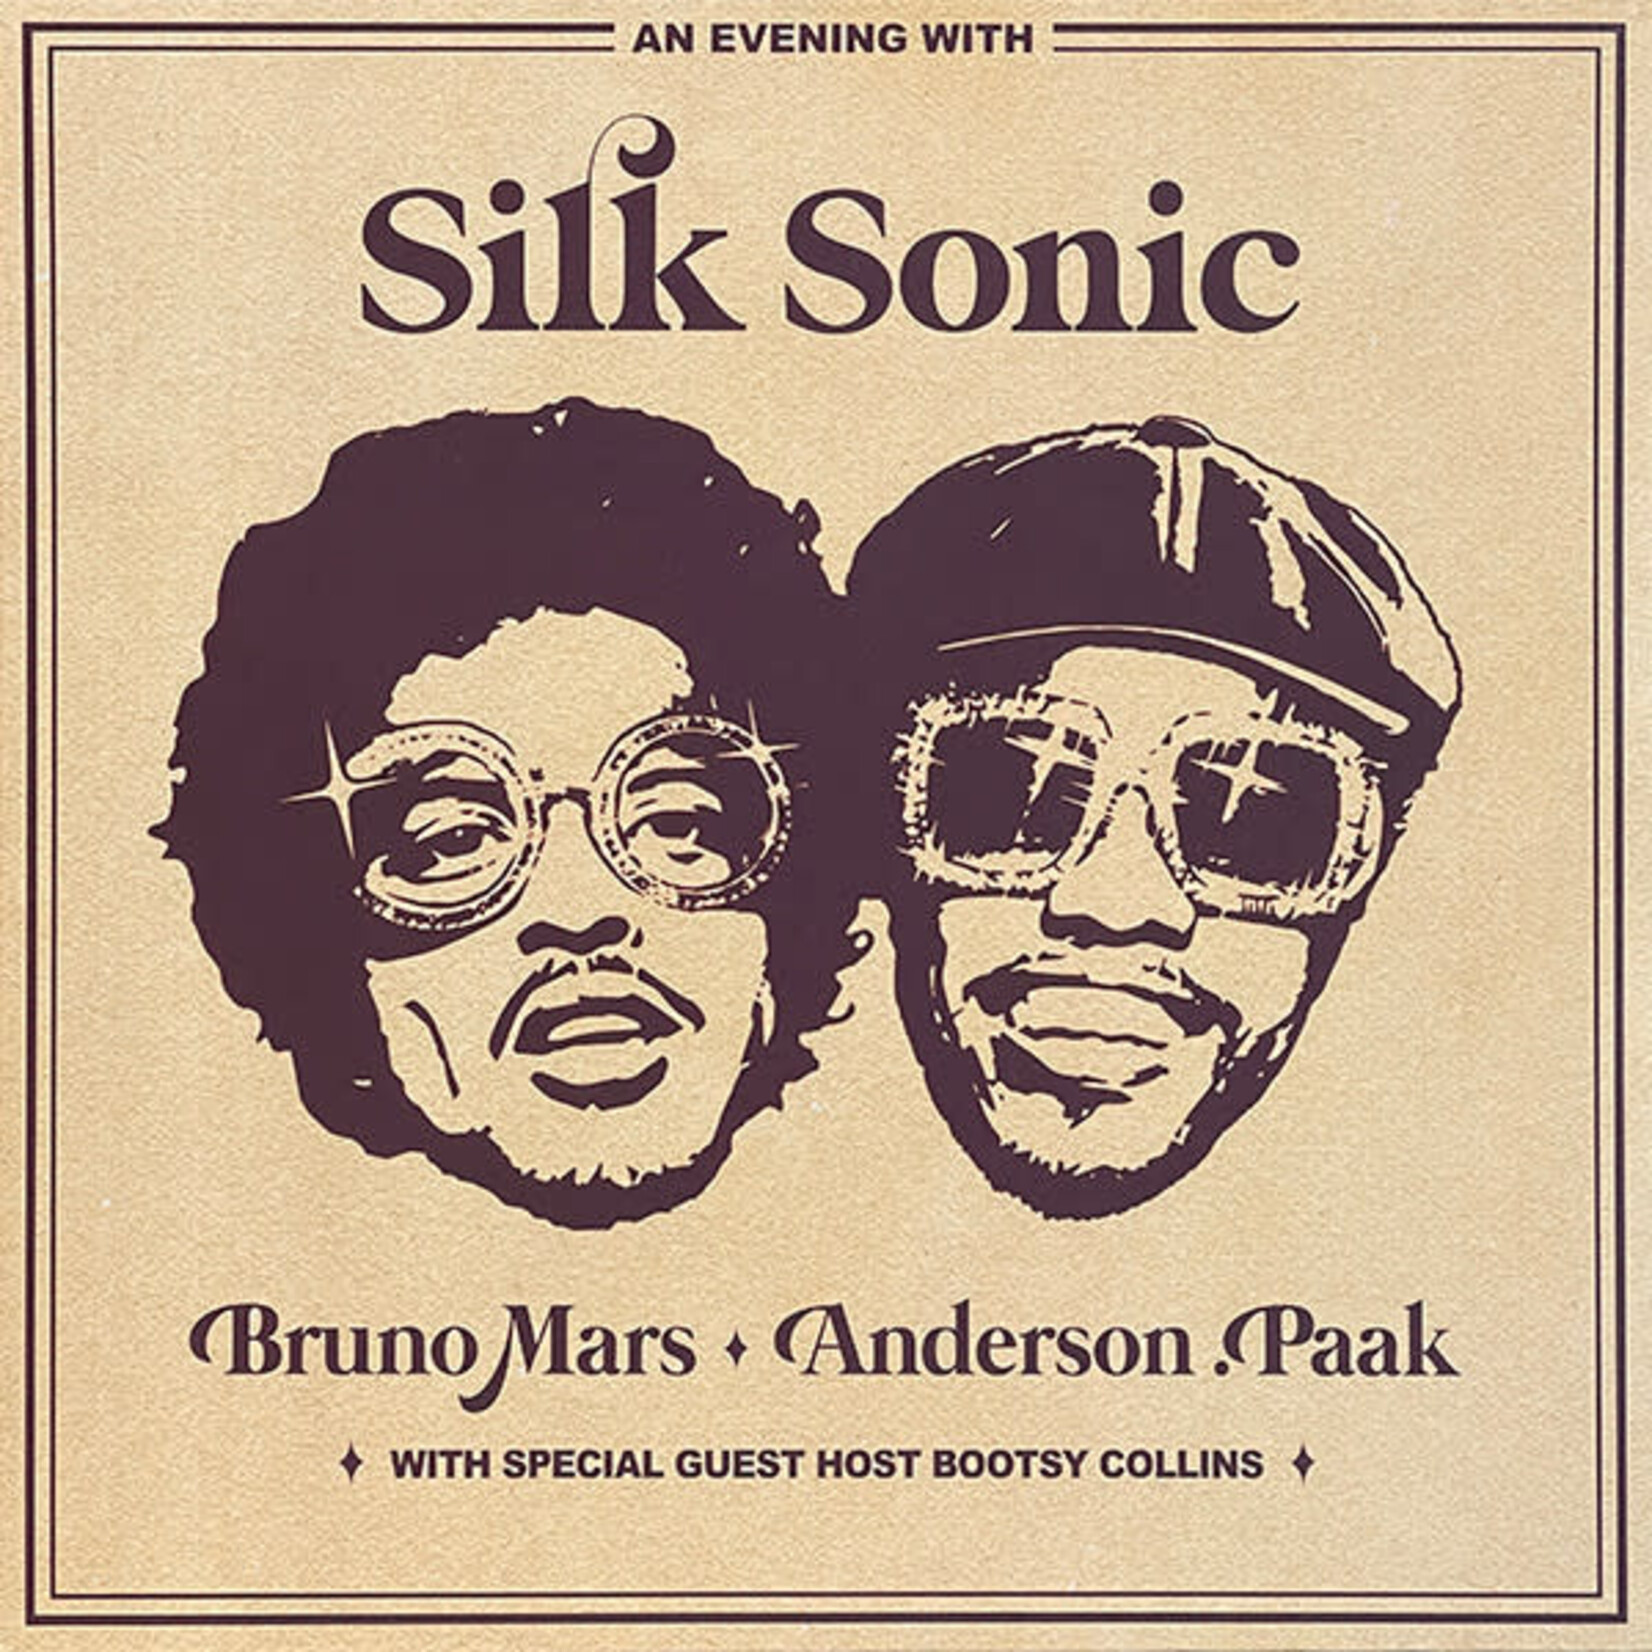 [New] Anderson .Paak, Bruno Mars, Silk Sonic - An Evening With Silk Sonic (Deluxe Edition, bonus track)